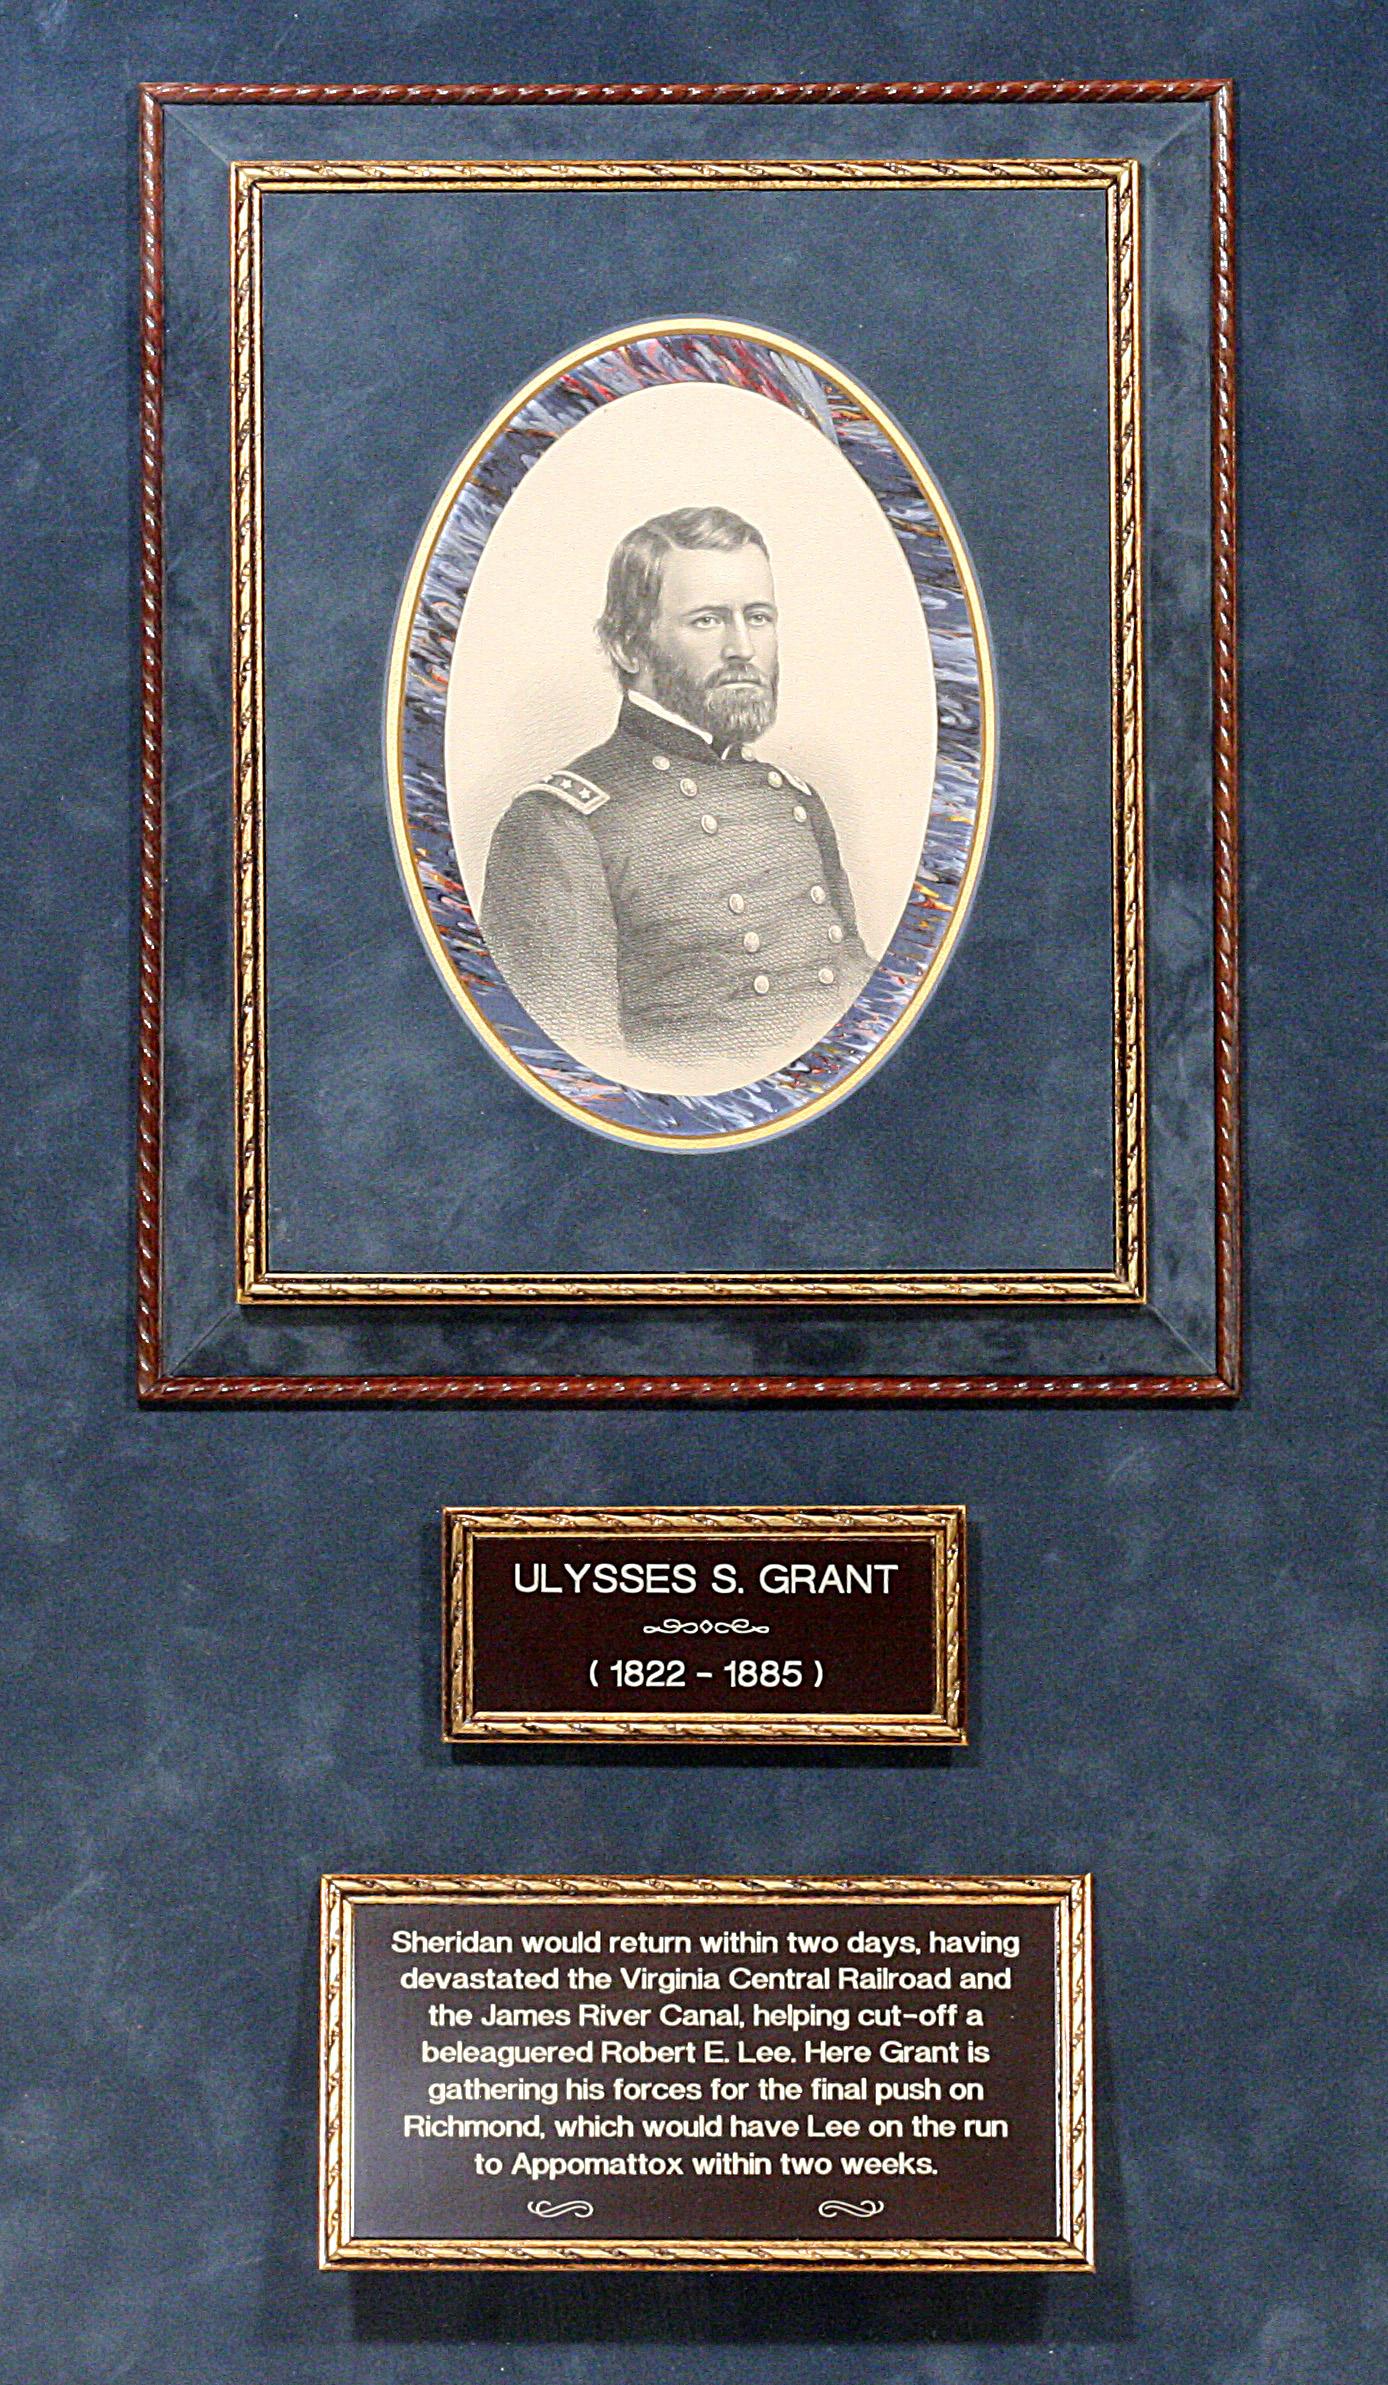 American Ulysses S. Grant - Autograph Letter Signed Directing Generals for the War's End